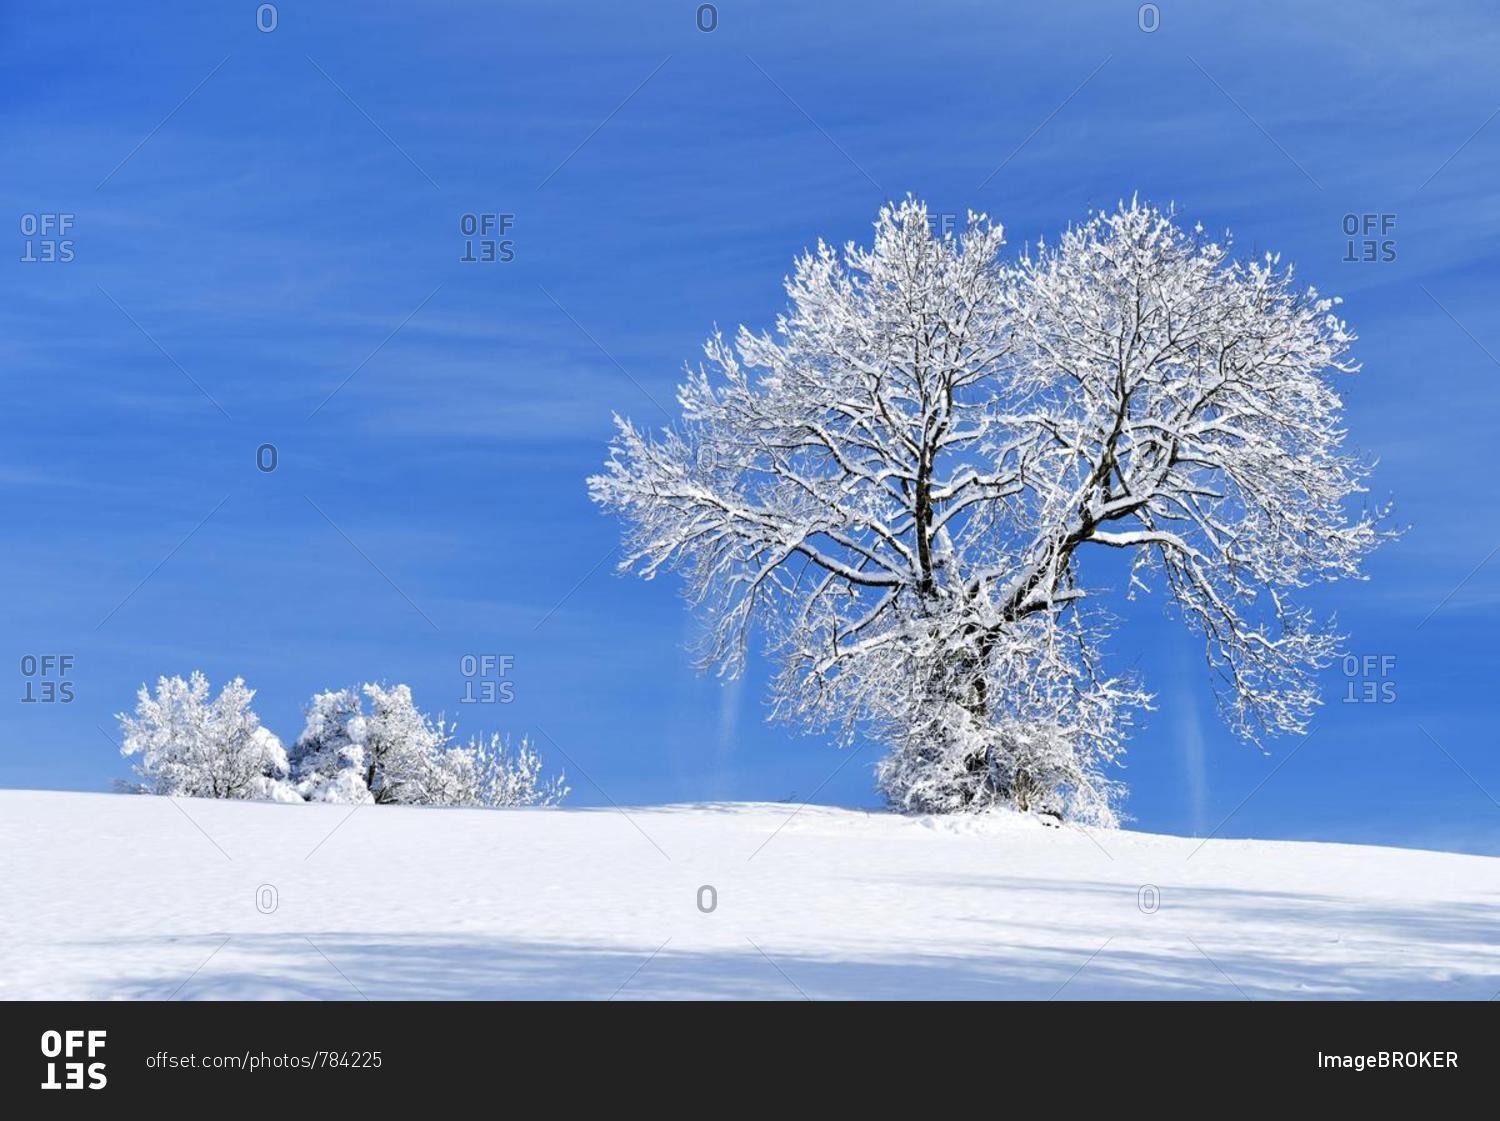 Landscape with snow-covered trees, Zugerberg, Canton of Zug, Switzerland, Europe